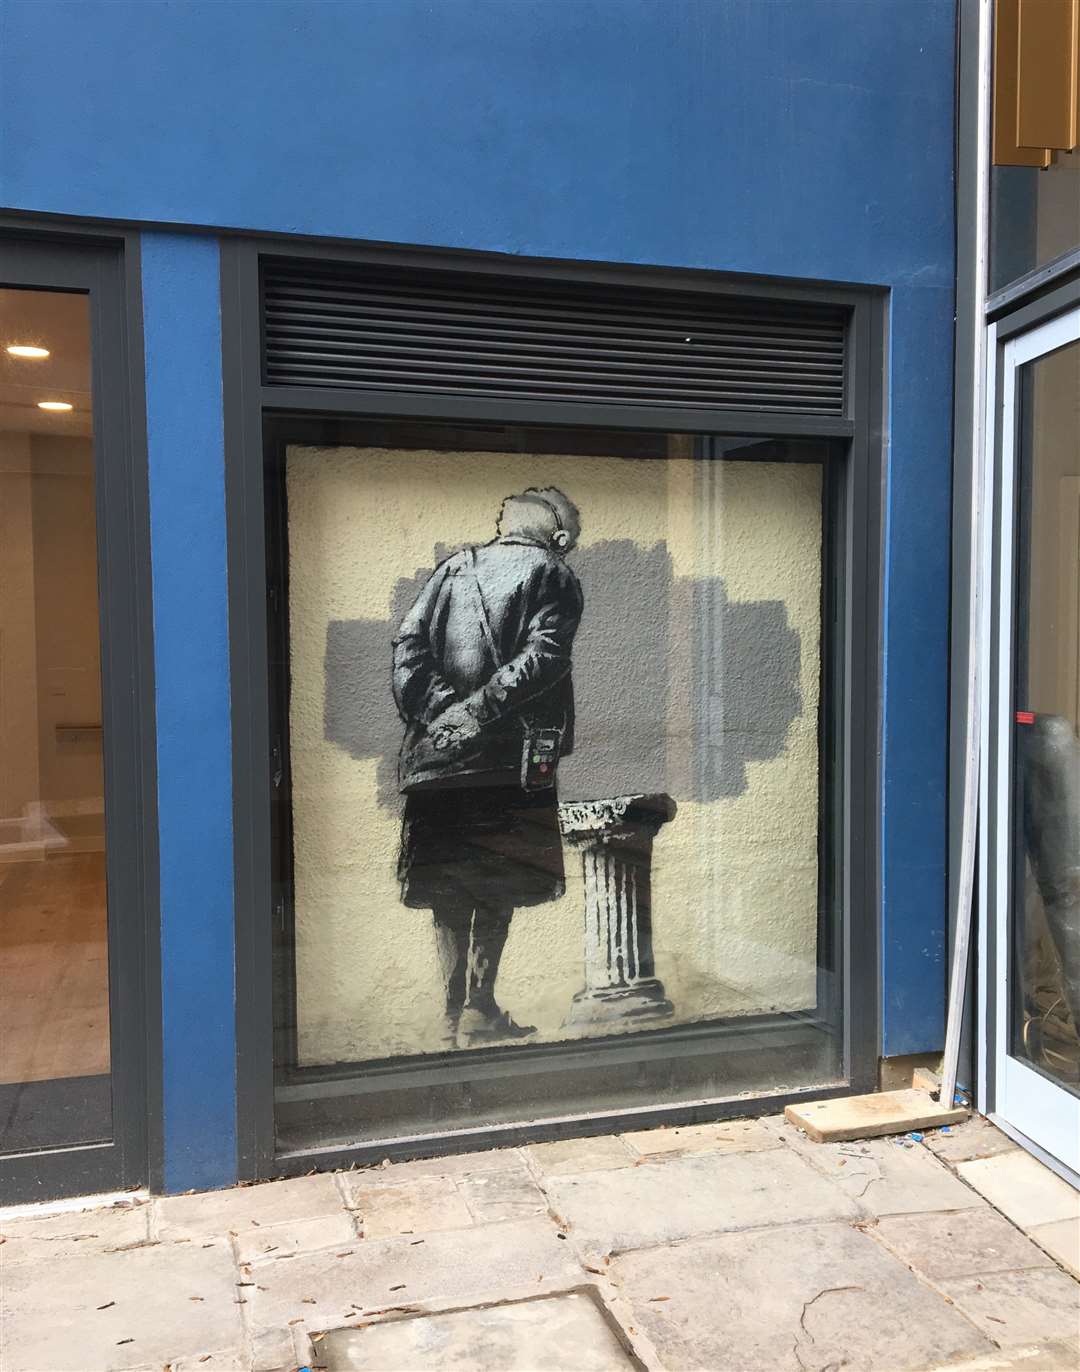 Banksy's Art Buff is on show to anyone walking past - if they look out for it